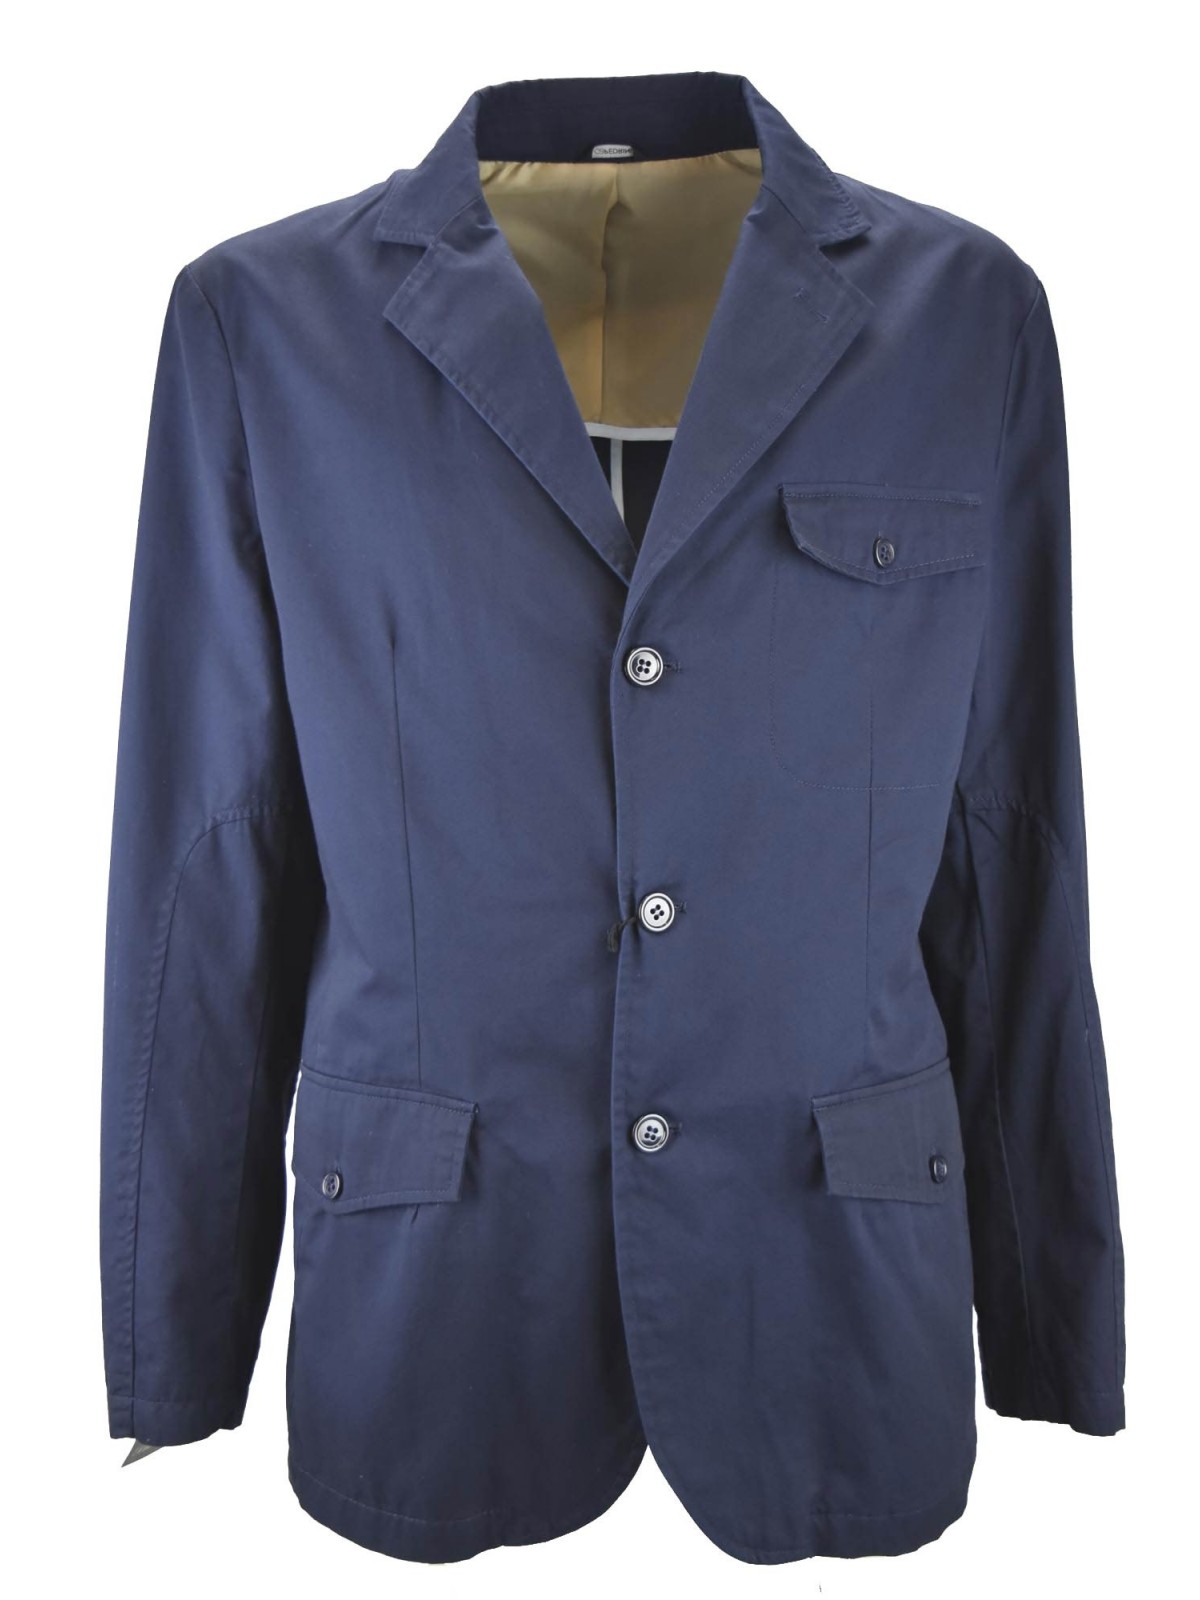 Men's Casual Jacket in Pure Cotton Dark Blue Solid Color 3 Buttons